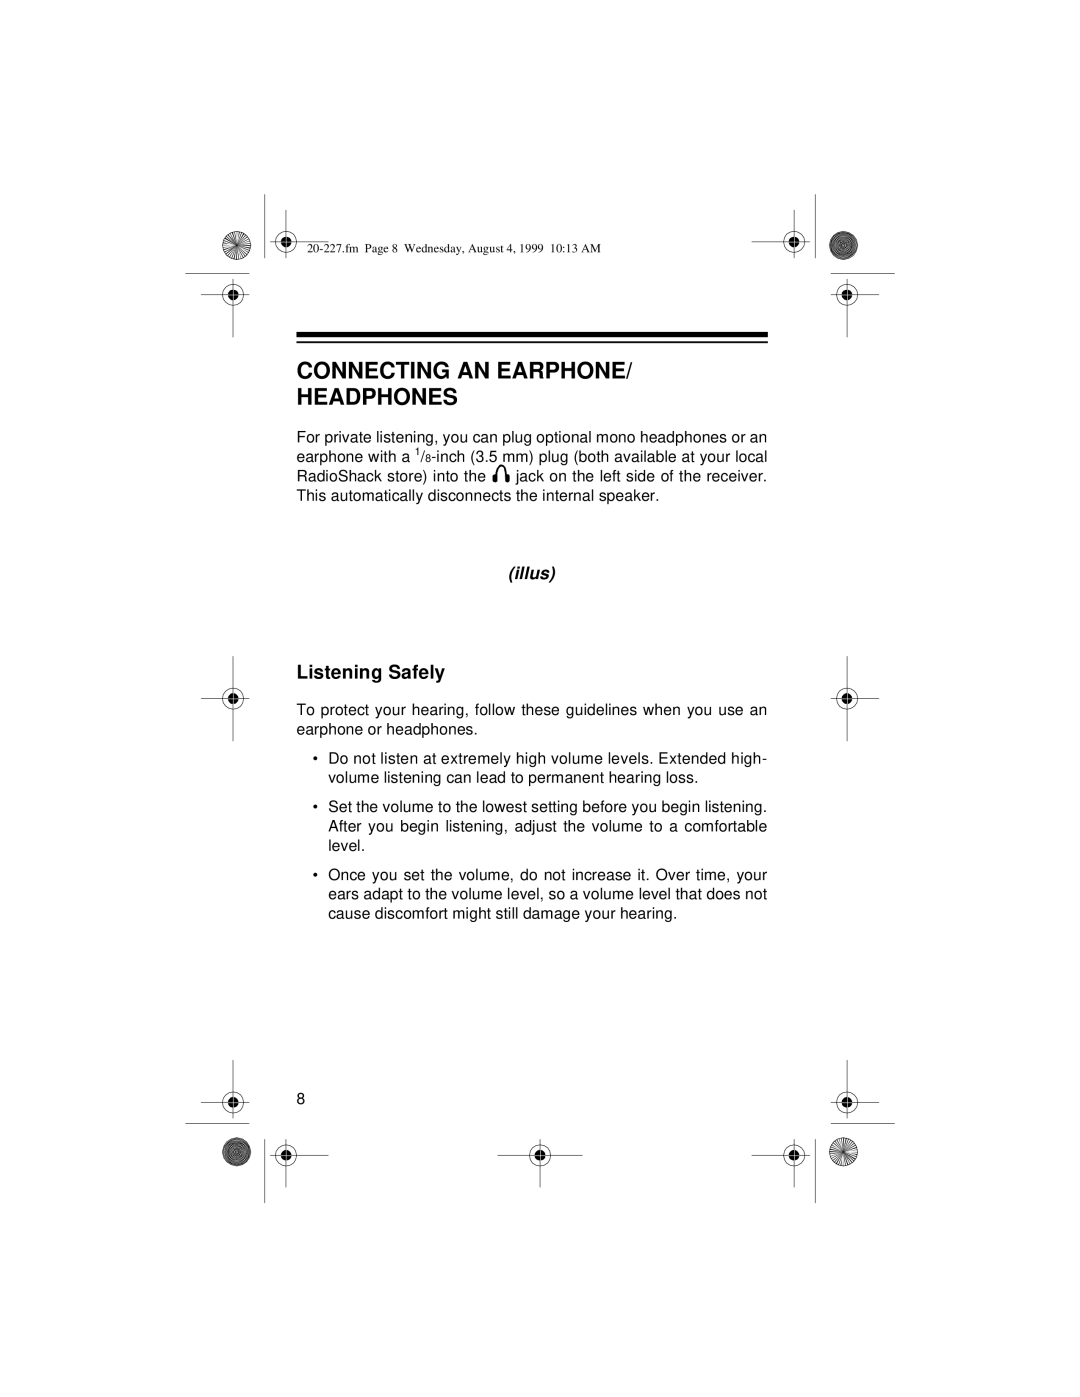 Radio Shack DX-397 owner manual Connecting An Earphone Headphones, Listening Safely, illus 